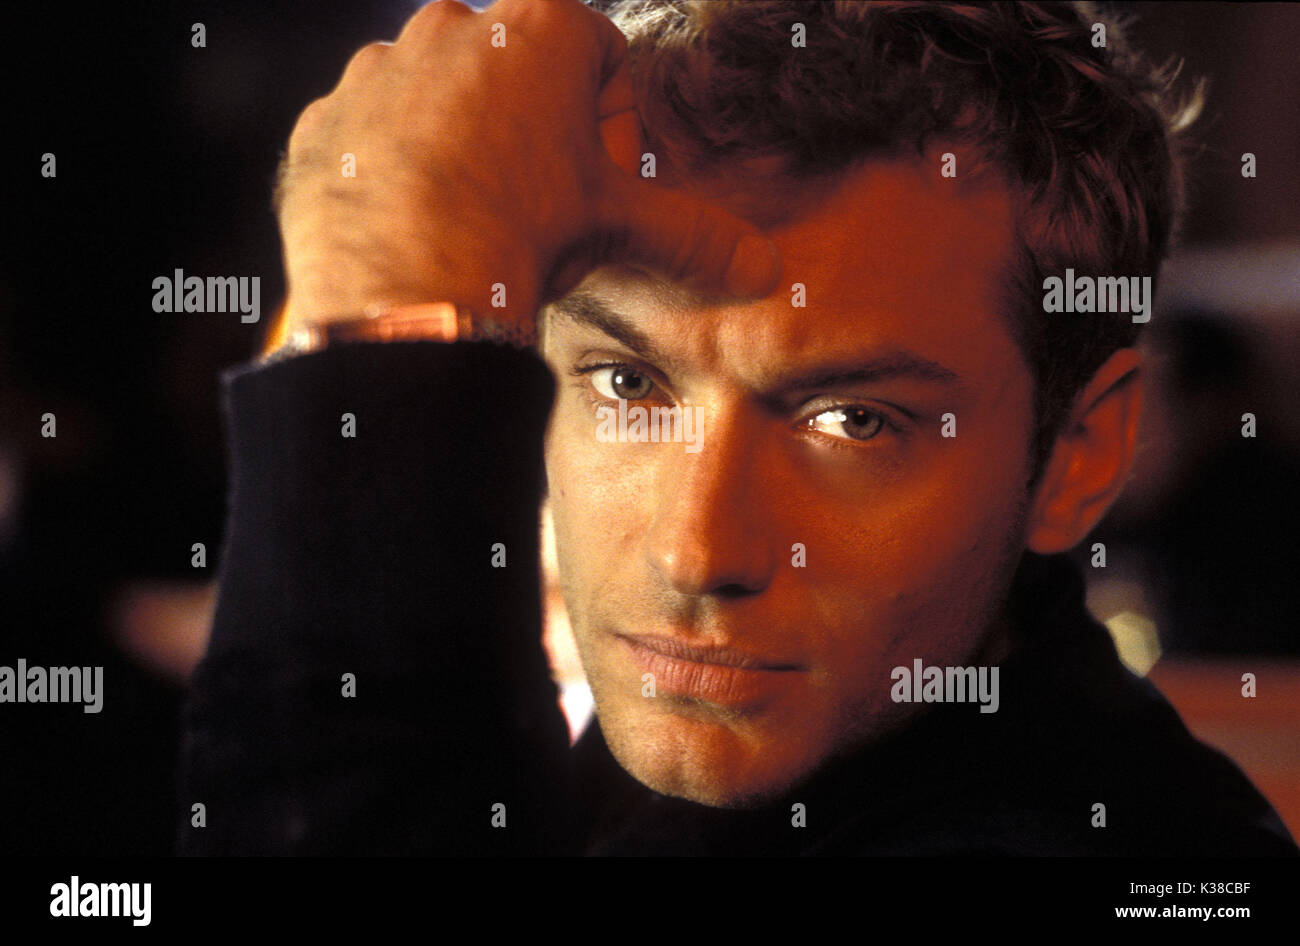 ALFIE PARAMOUNT PICTURES JUDE LAW     Date: 2004 Stock Photo